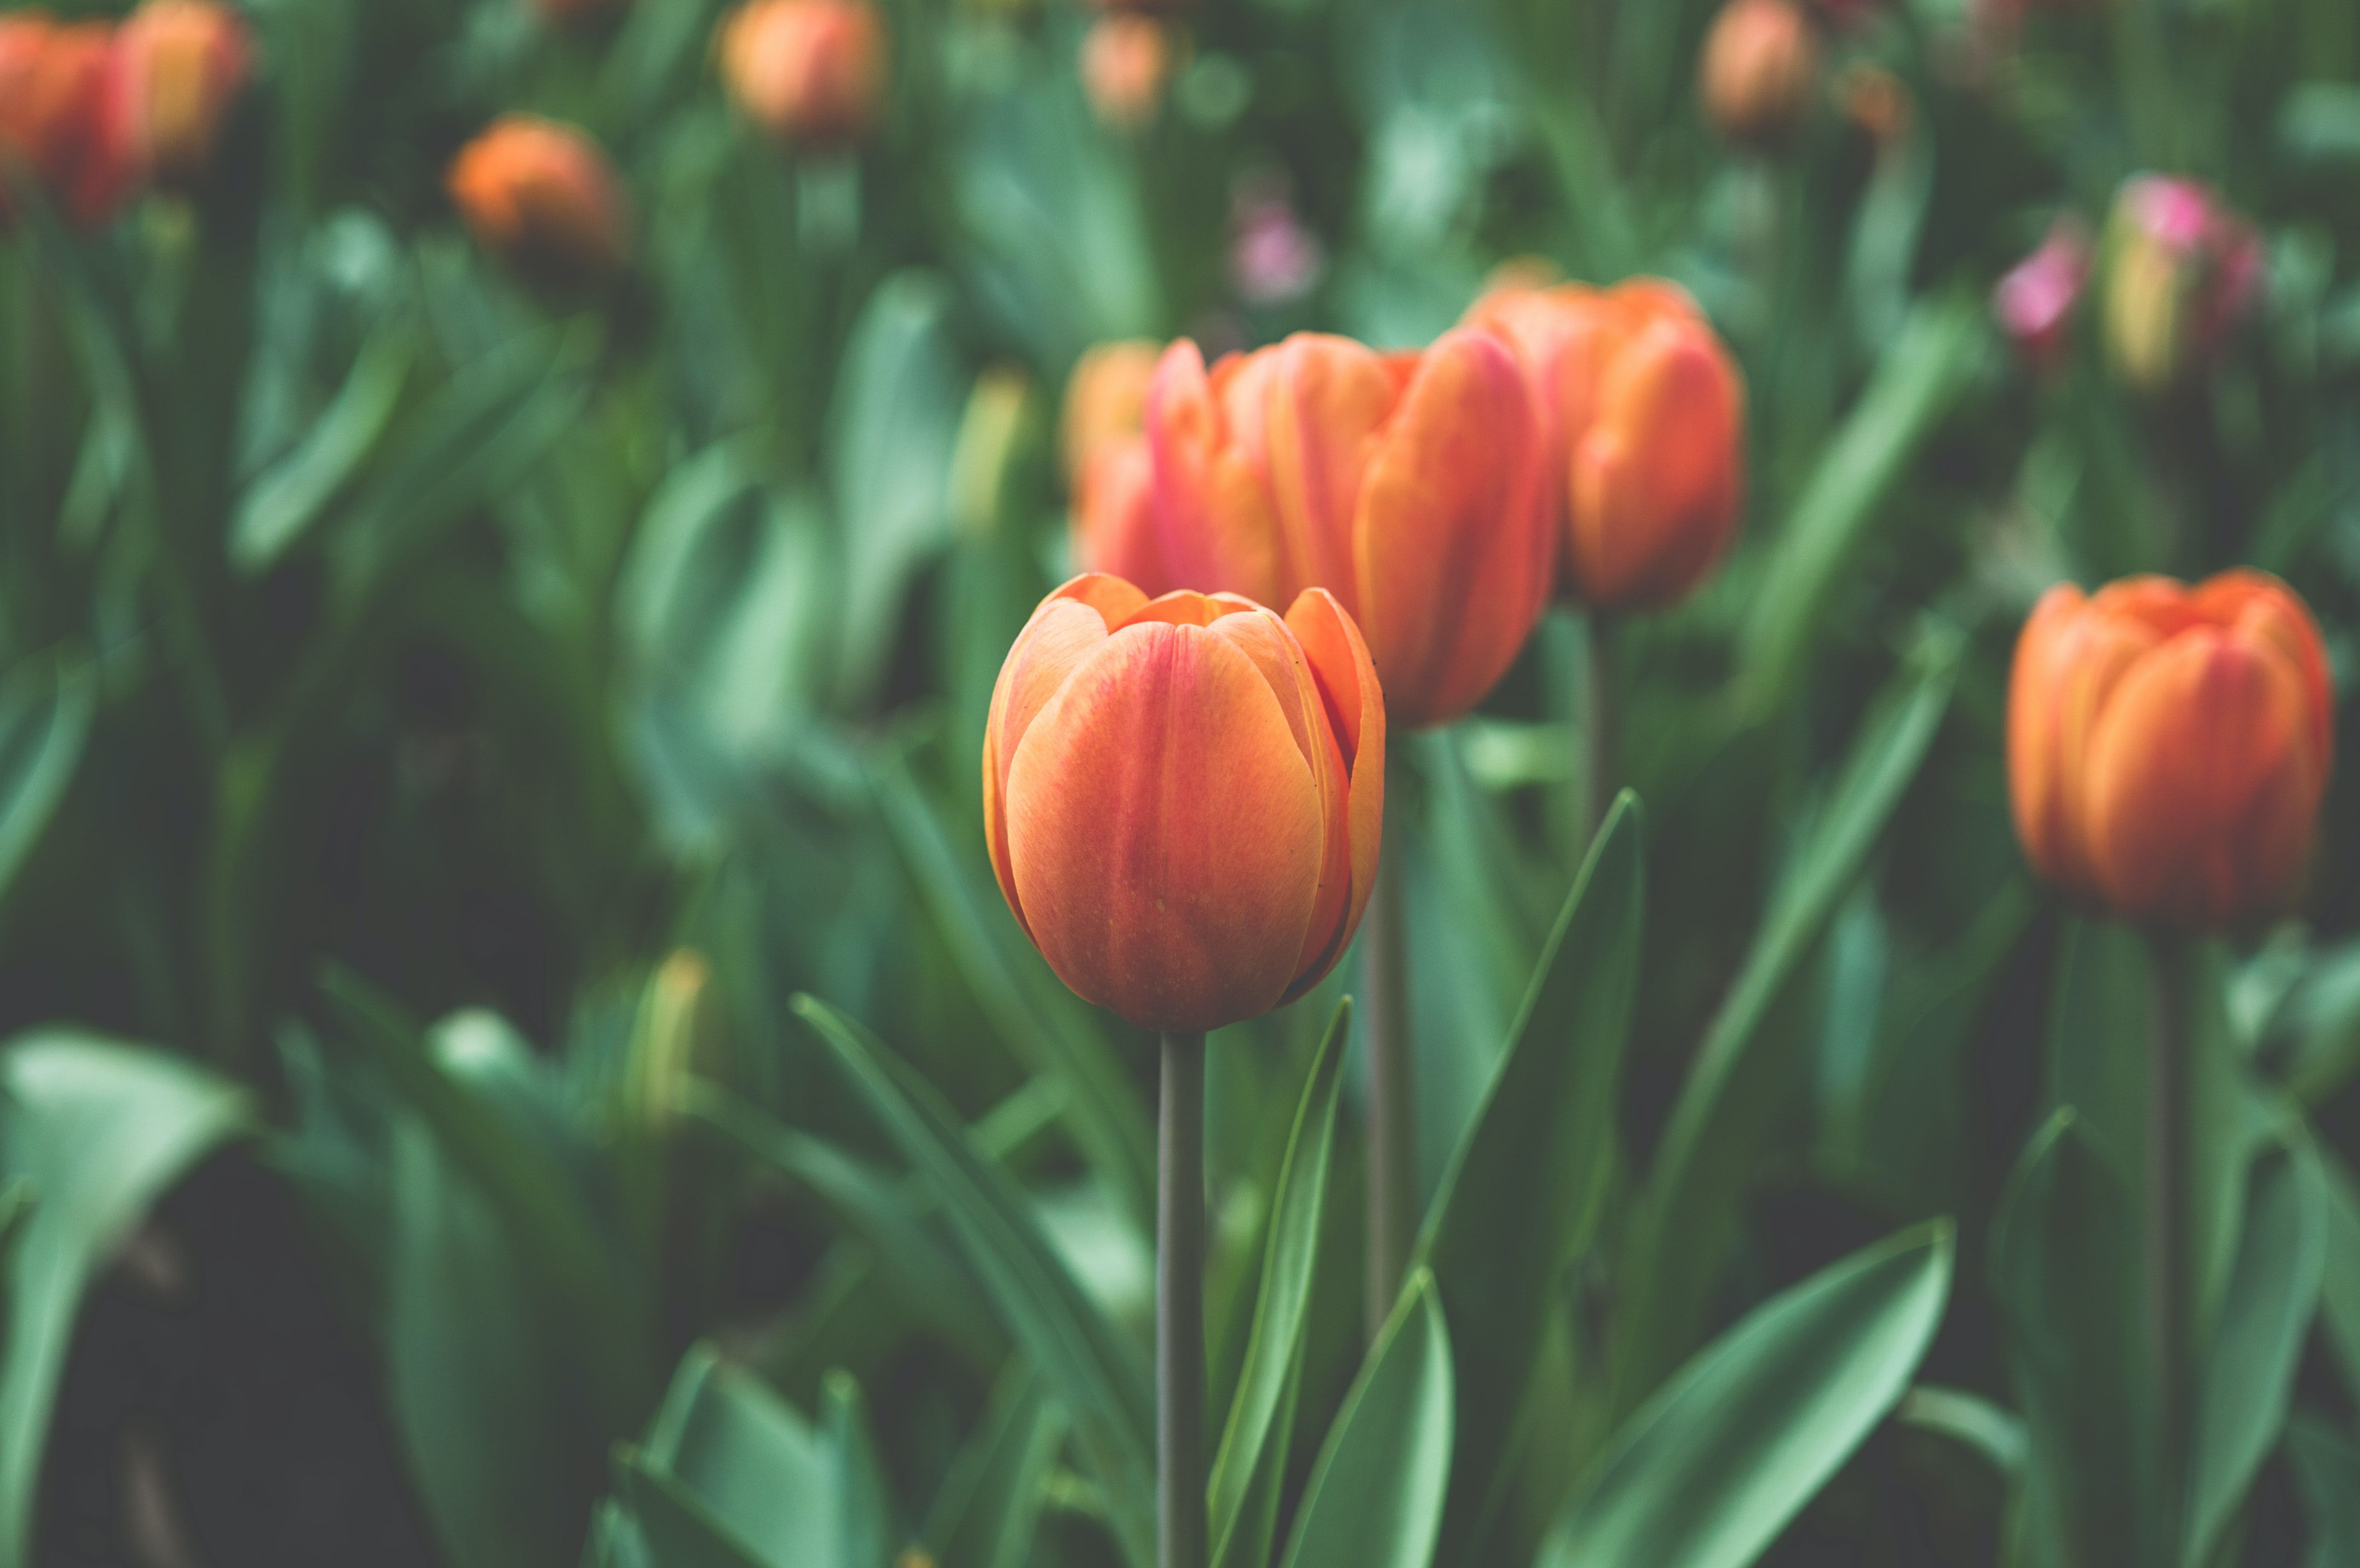 A field of tulips with orange flowers - Tulip